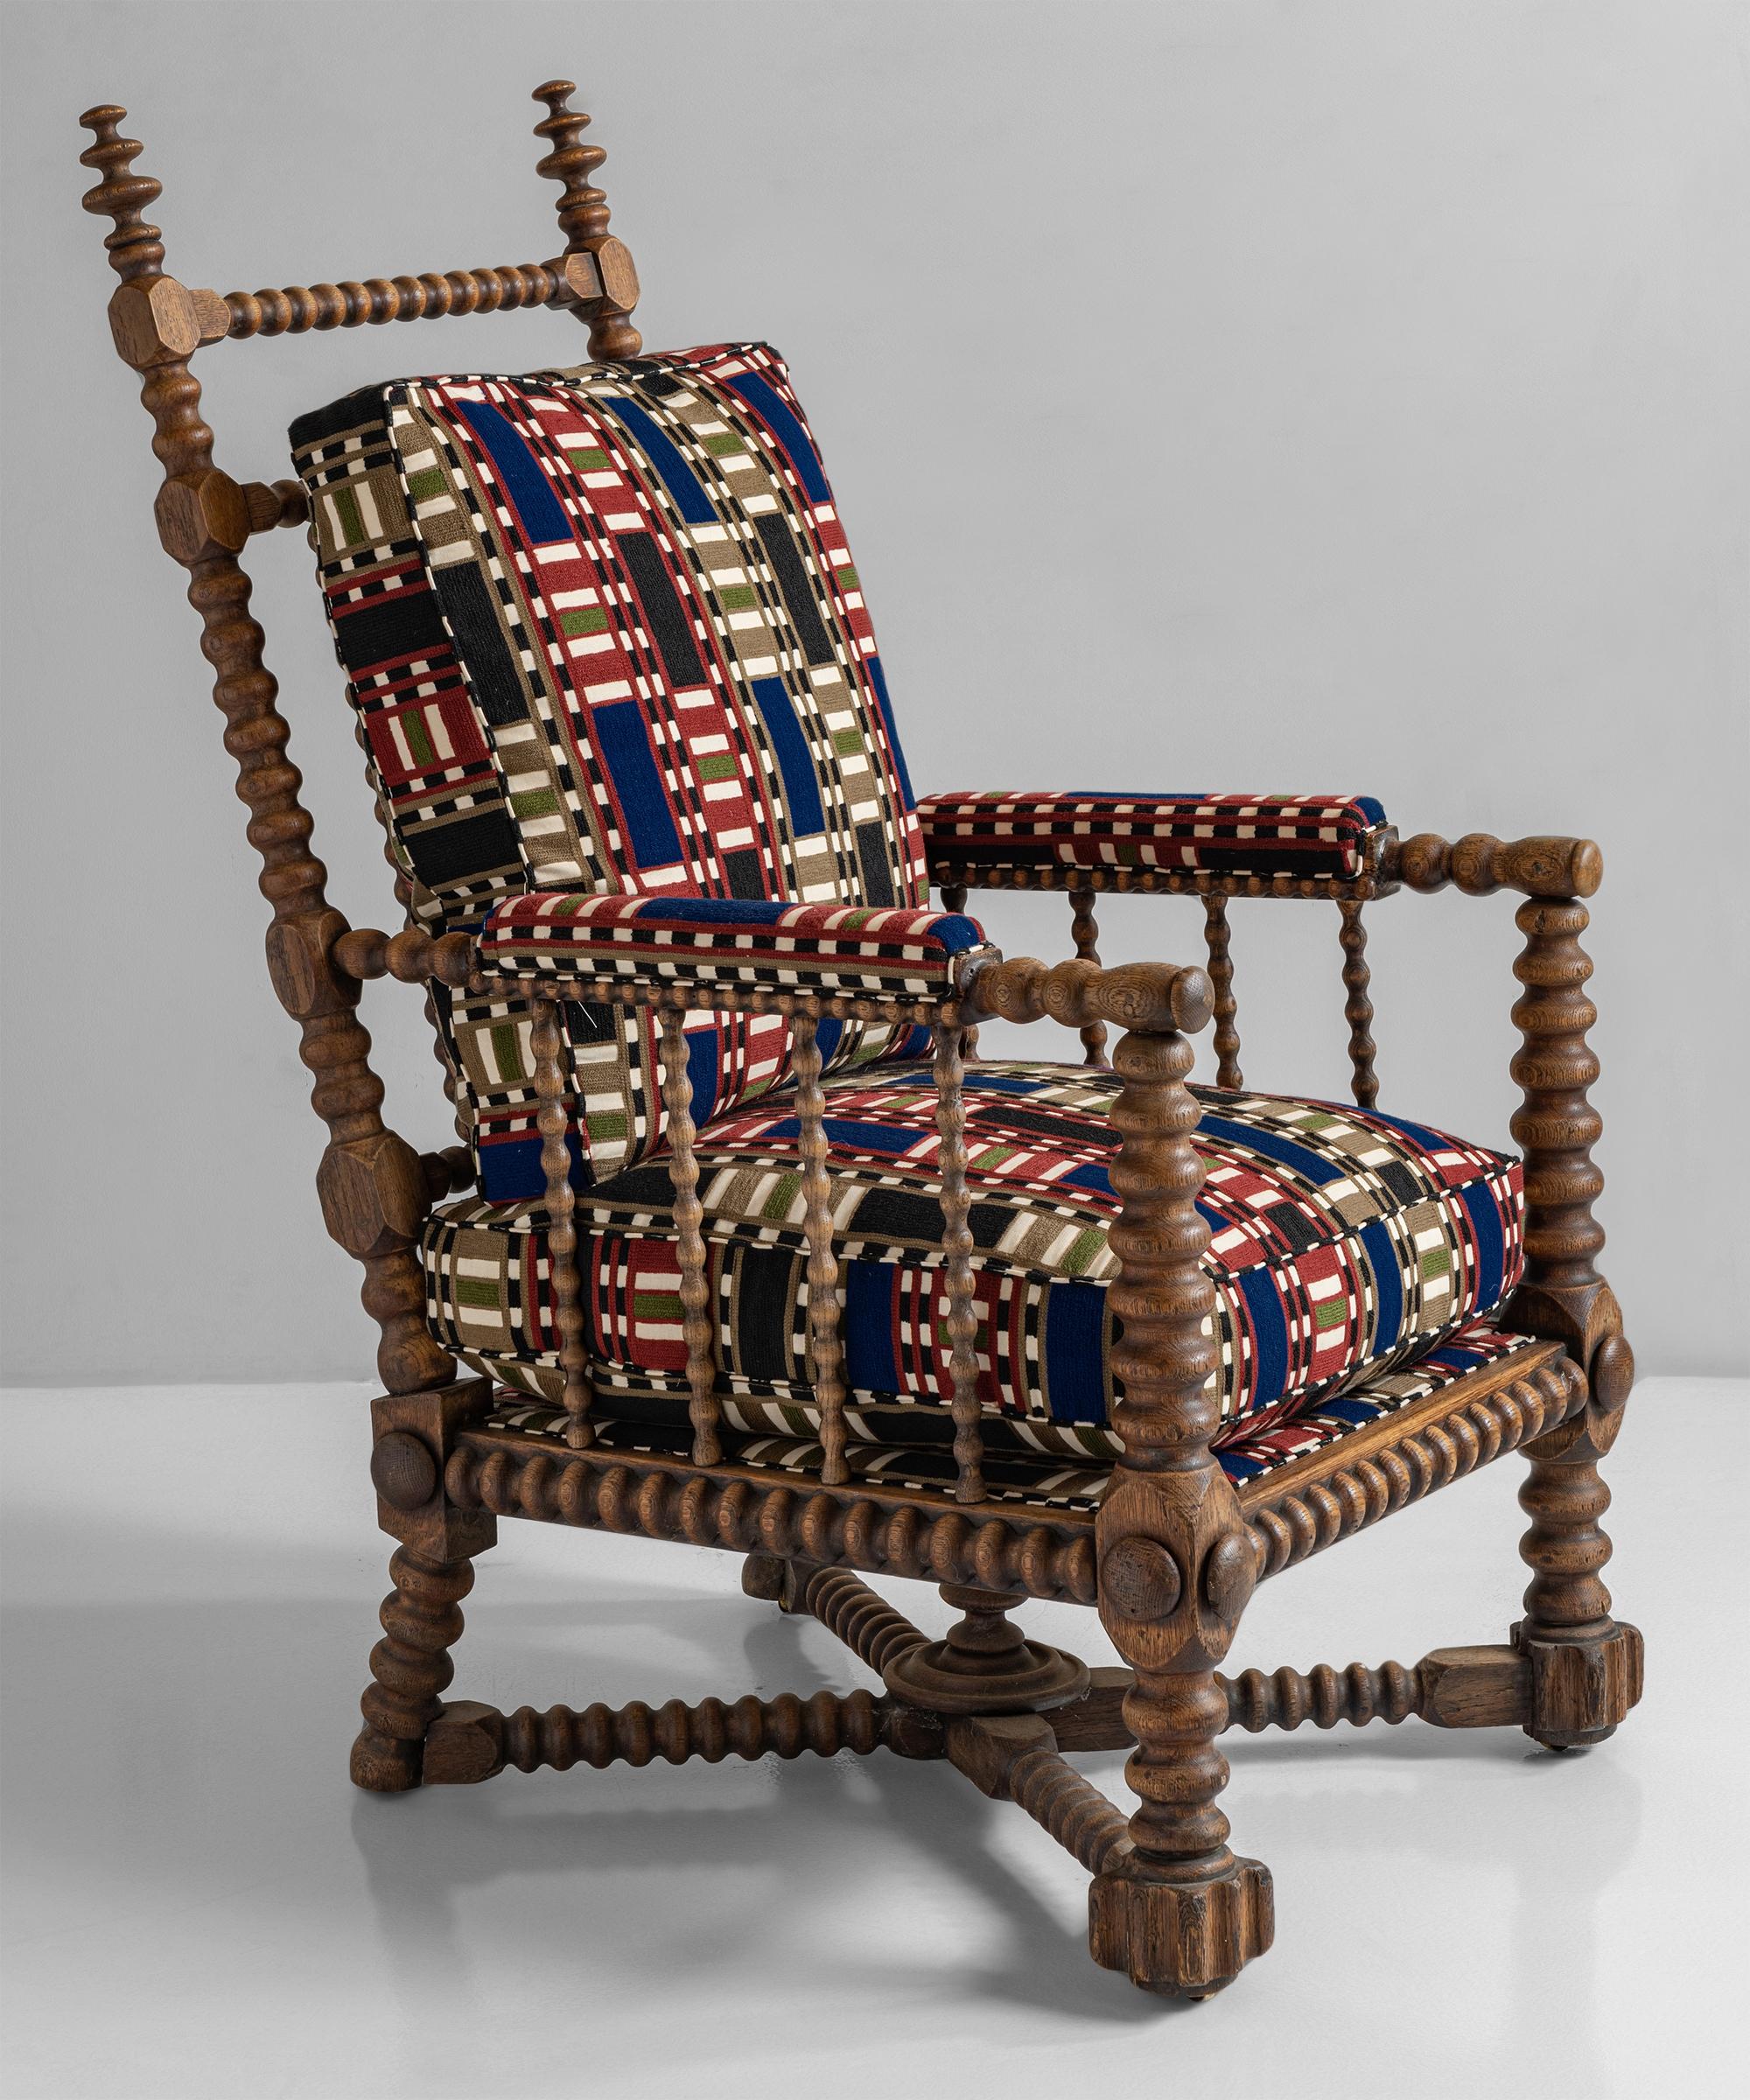 Oak Bobbin armchair in wool-linen chain stitch embroidery from Pierre Frey
England circa 1890
Bobbin turned armchair with original castors.
Measure: 26